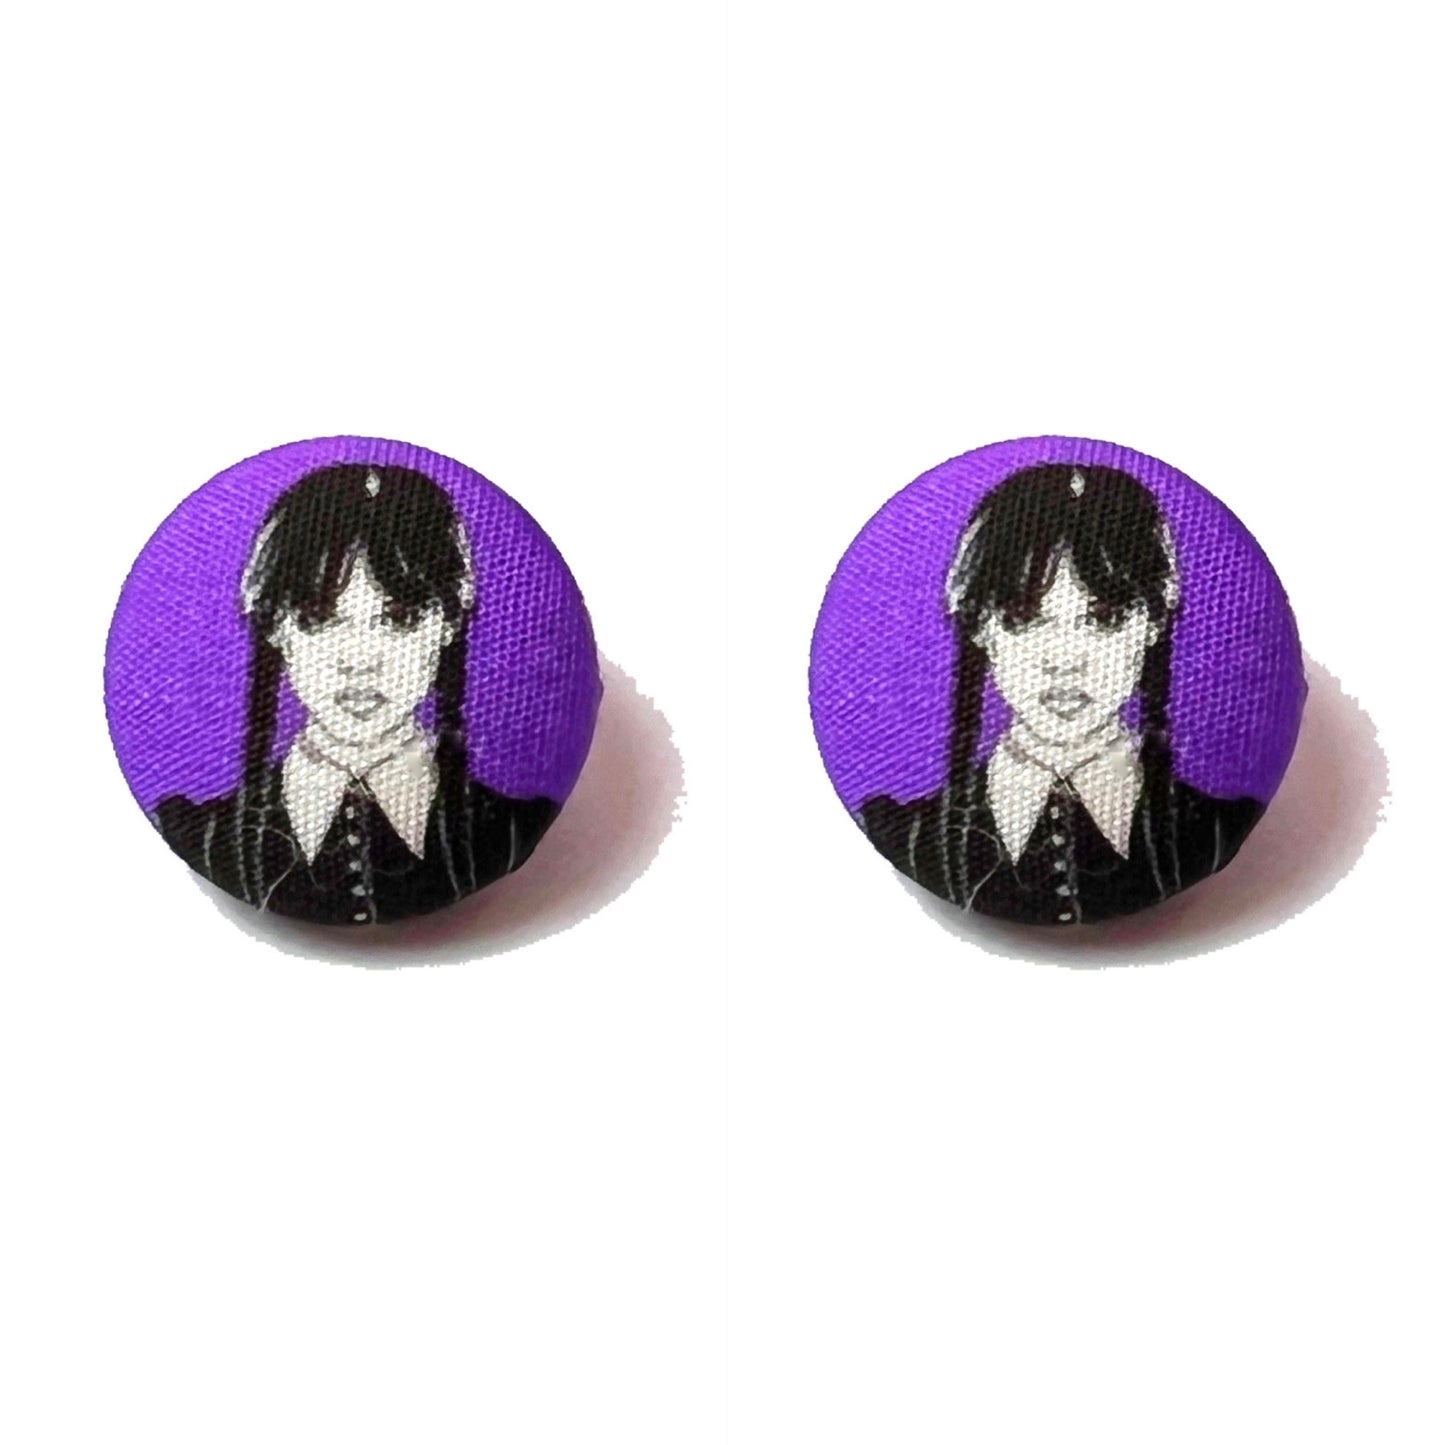 Wednesday Addams Fabric Button Earrings